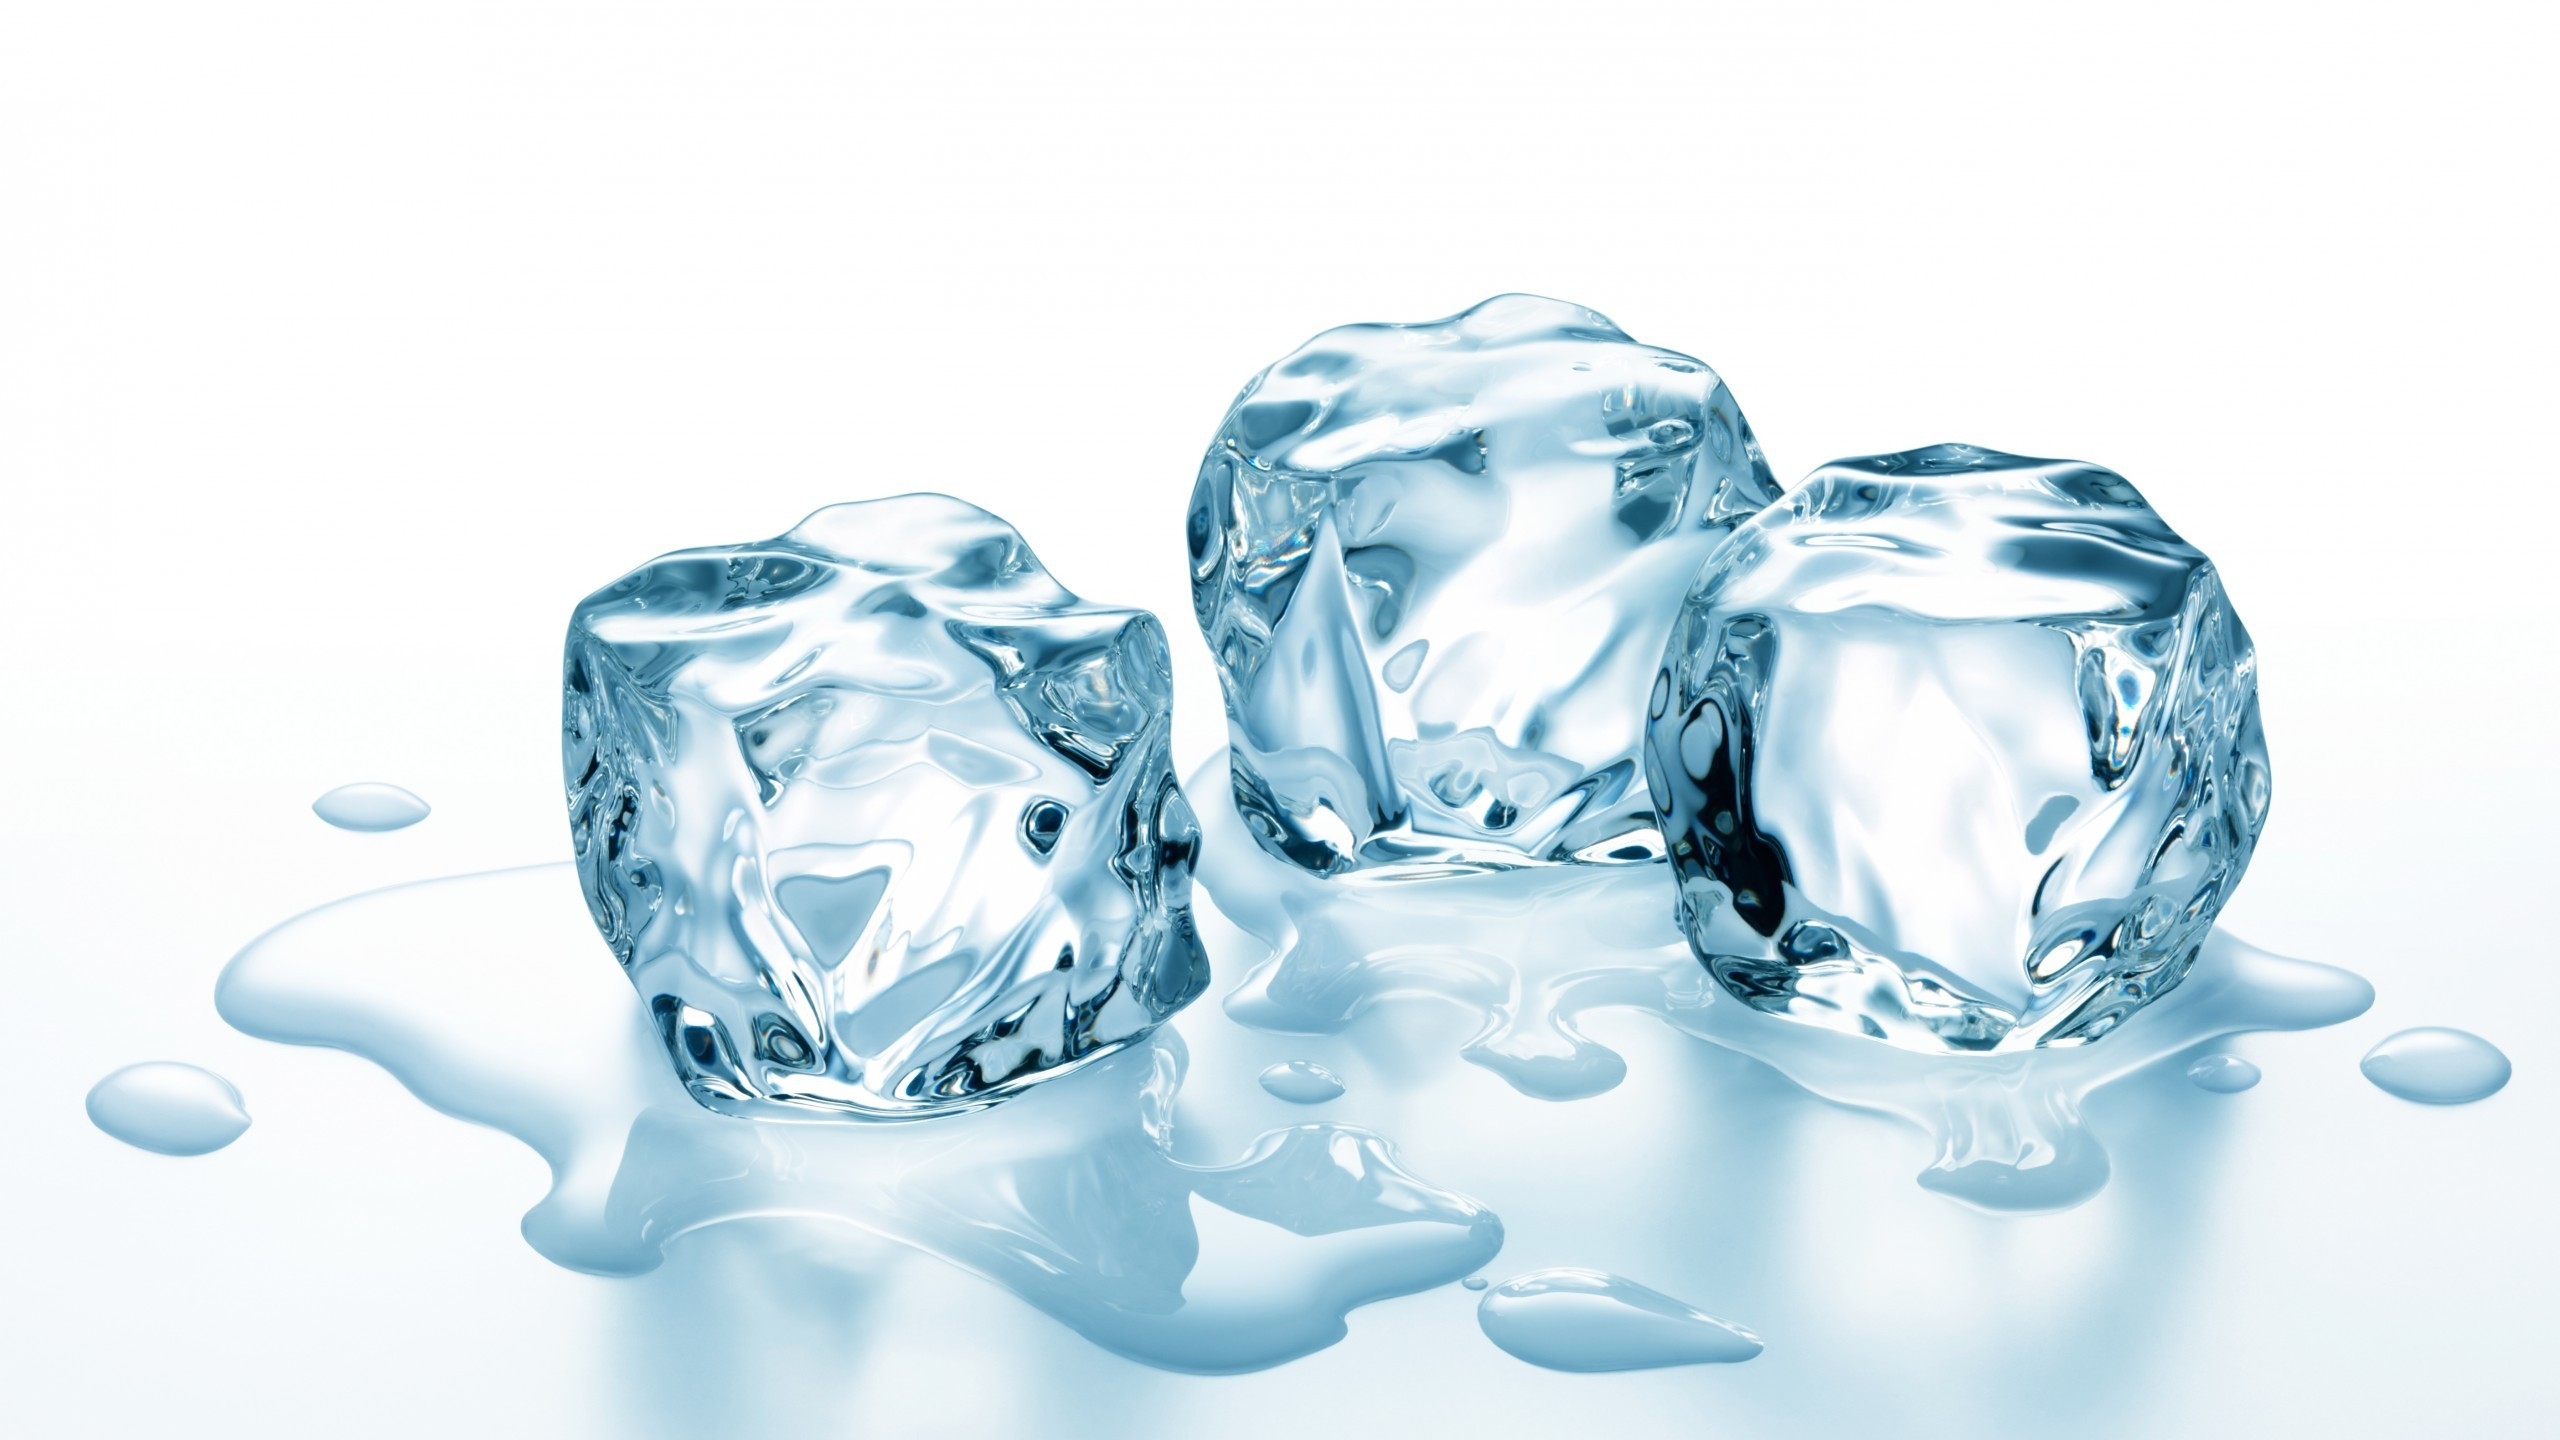 Ice Cubes for 2560x1440 HDTV resolution